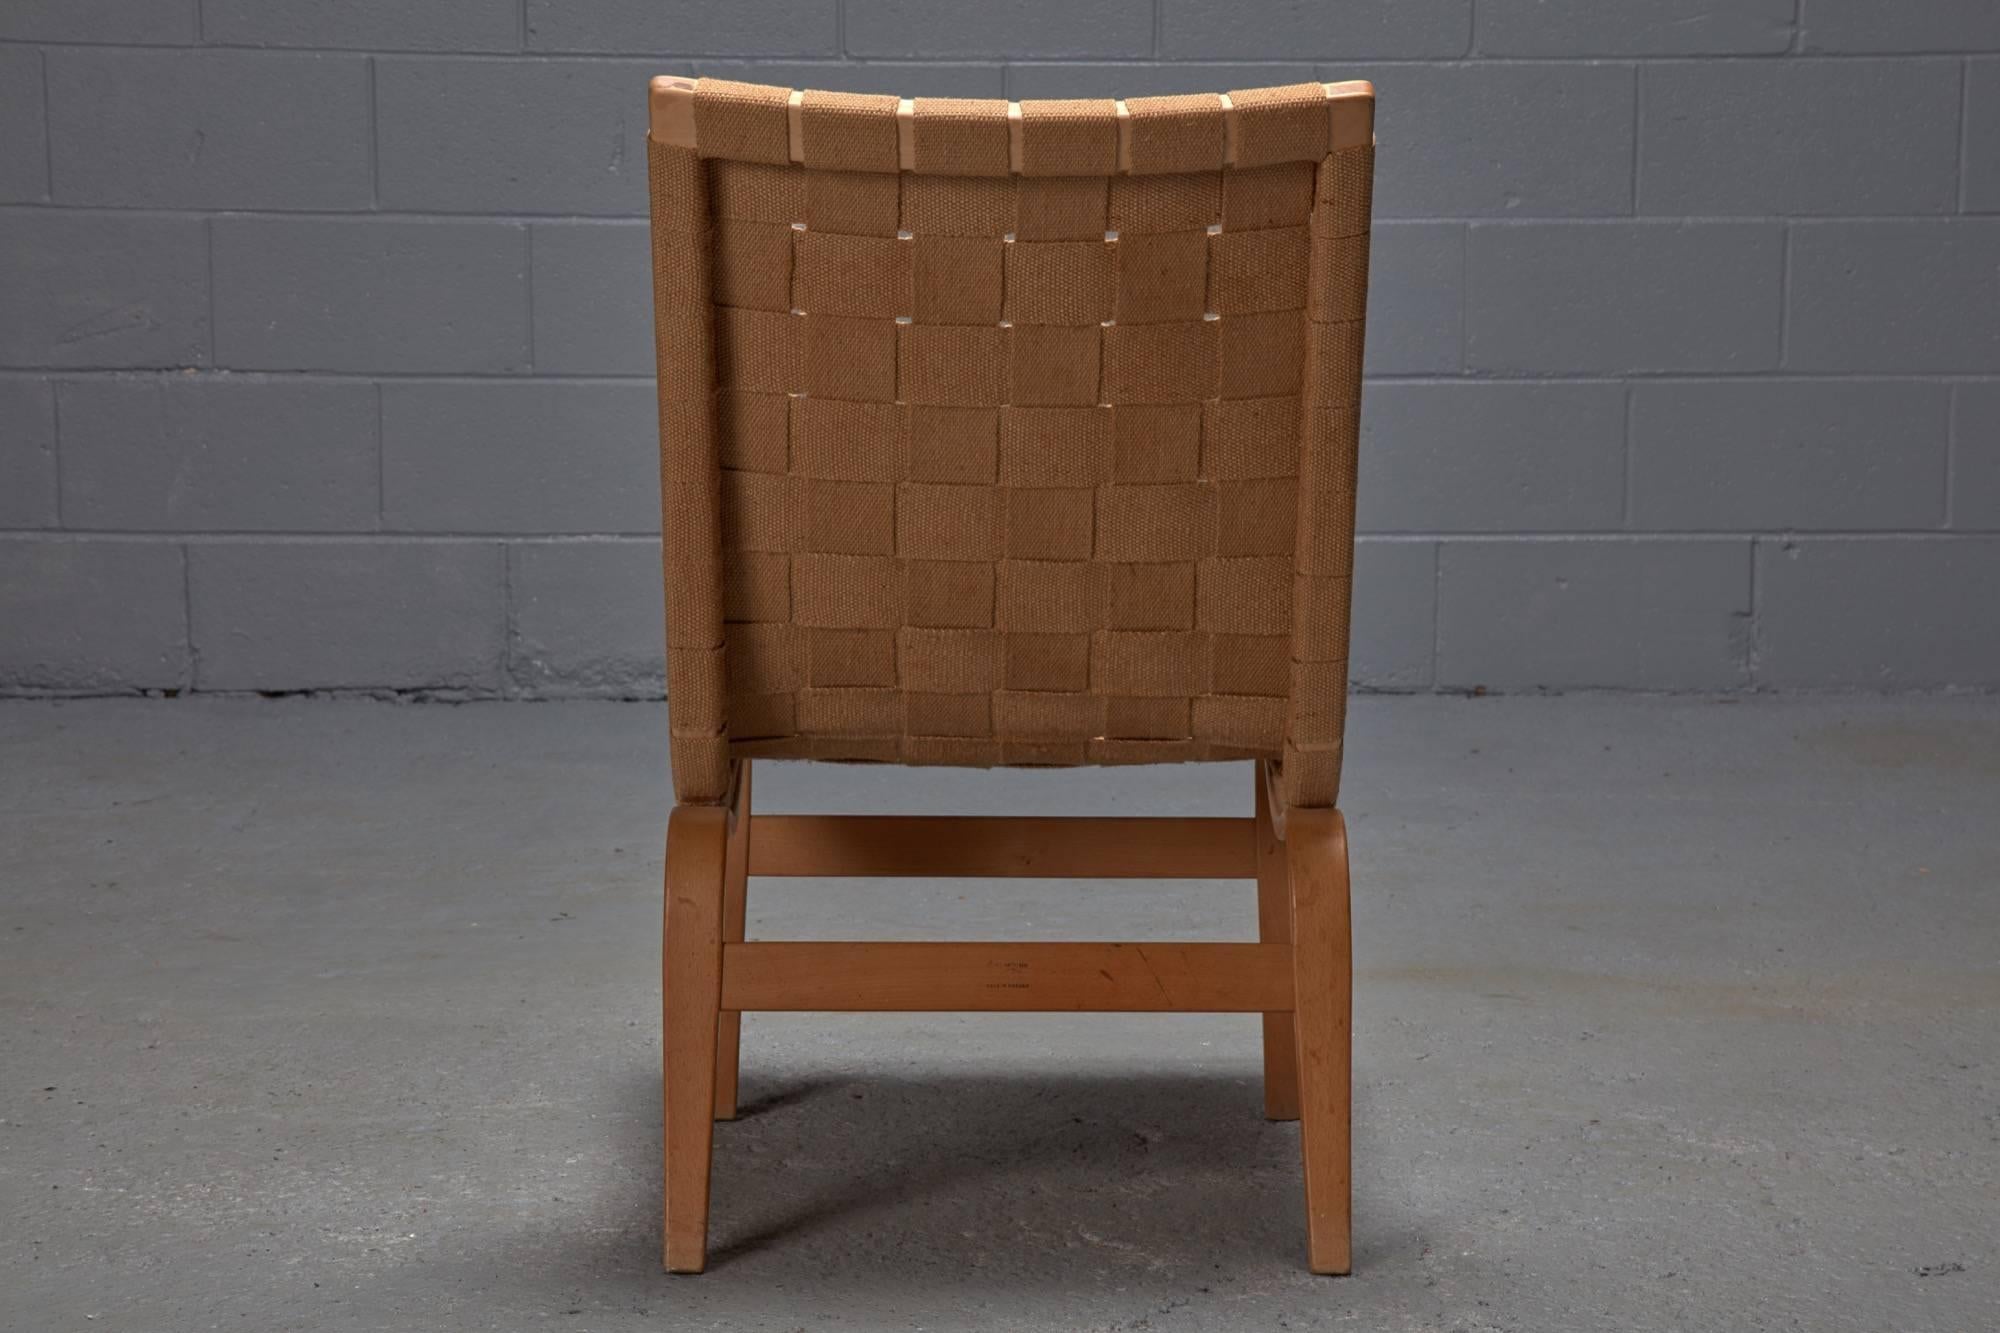 Swedish designer Bruno Mathsson created this particular Eva model with a low back and no arm rests. The birch frame supports a woven linen seat and back.